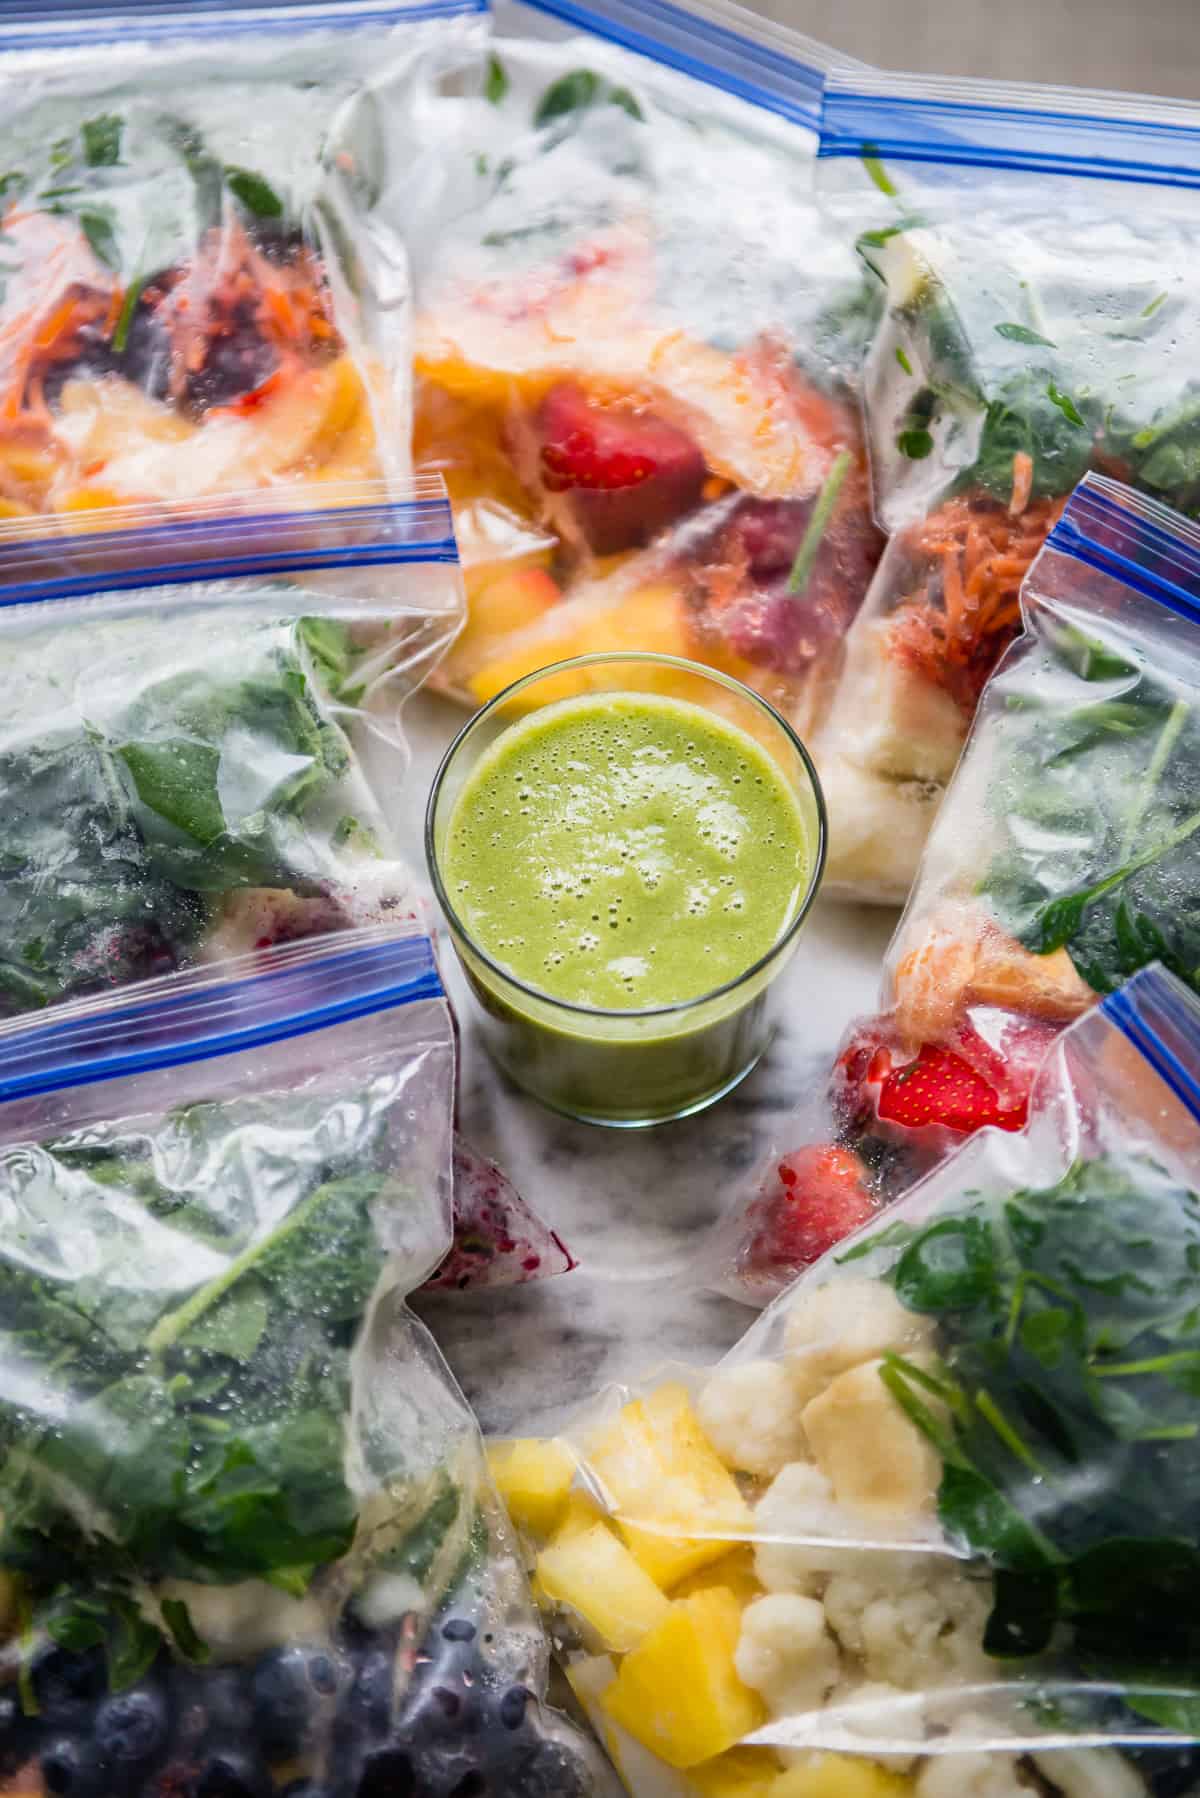 How to freeze greens ahead of time for smoothies